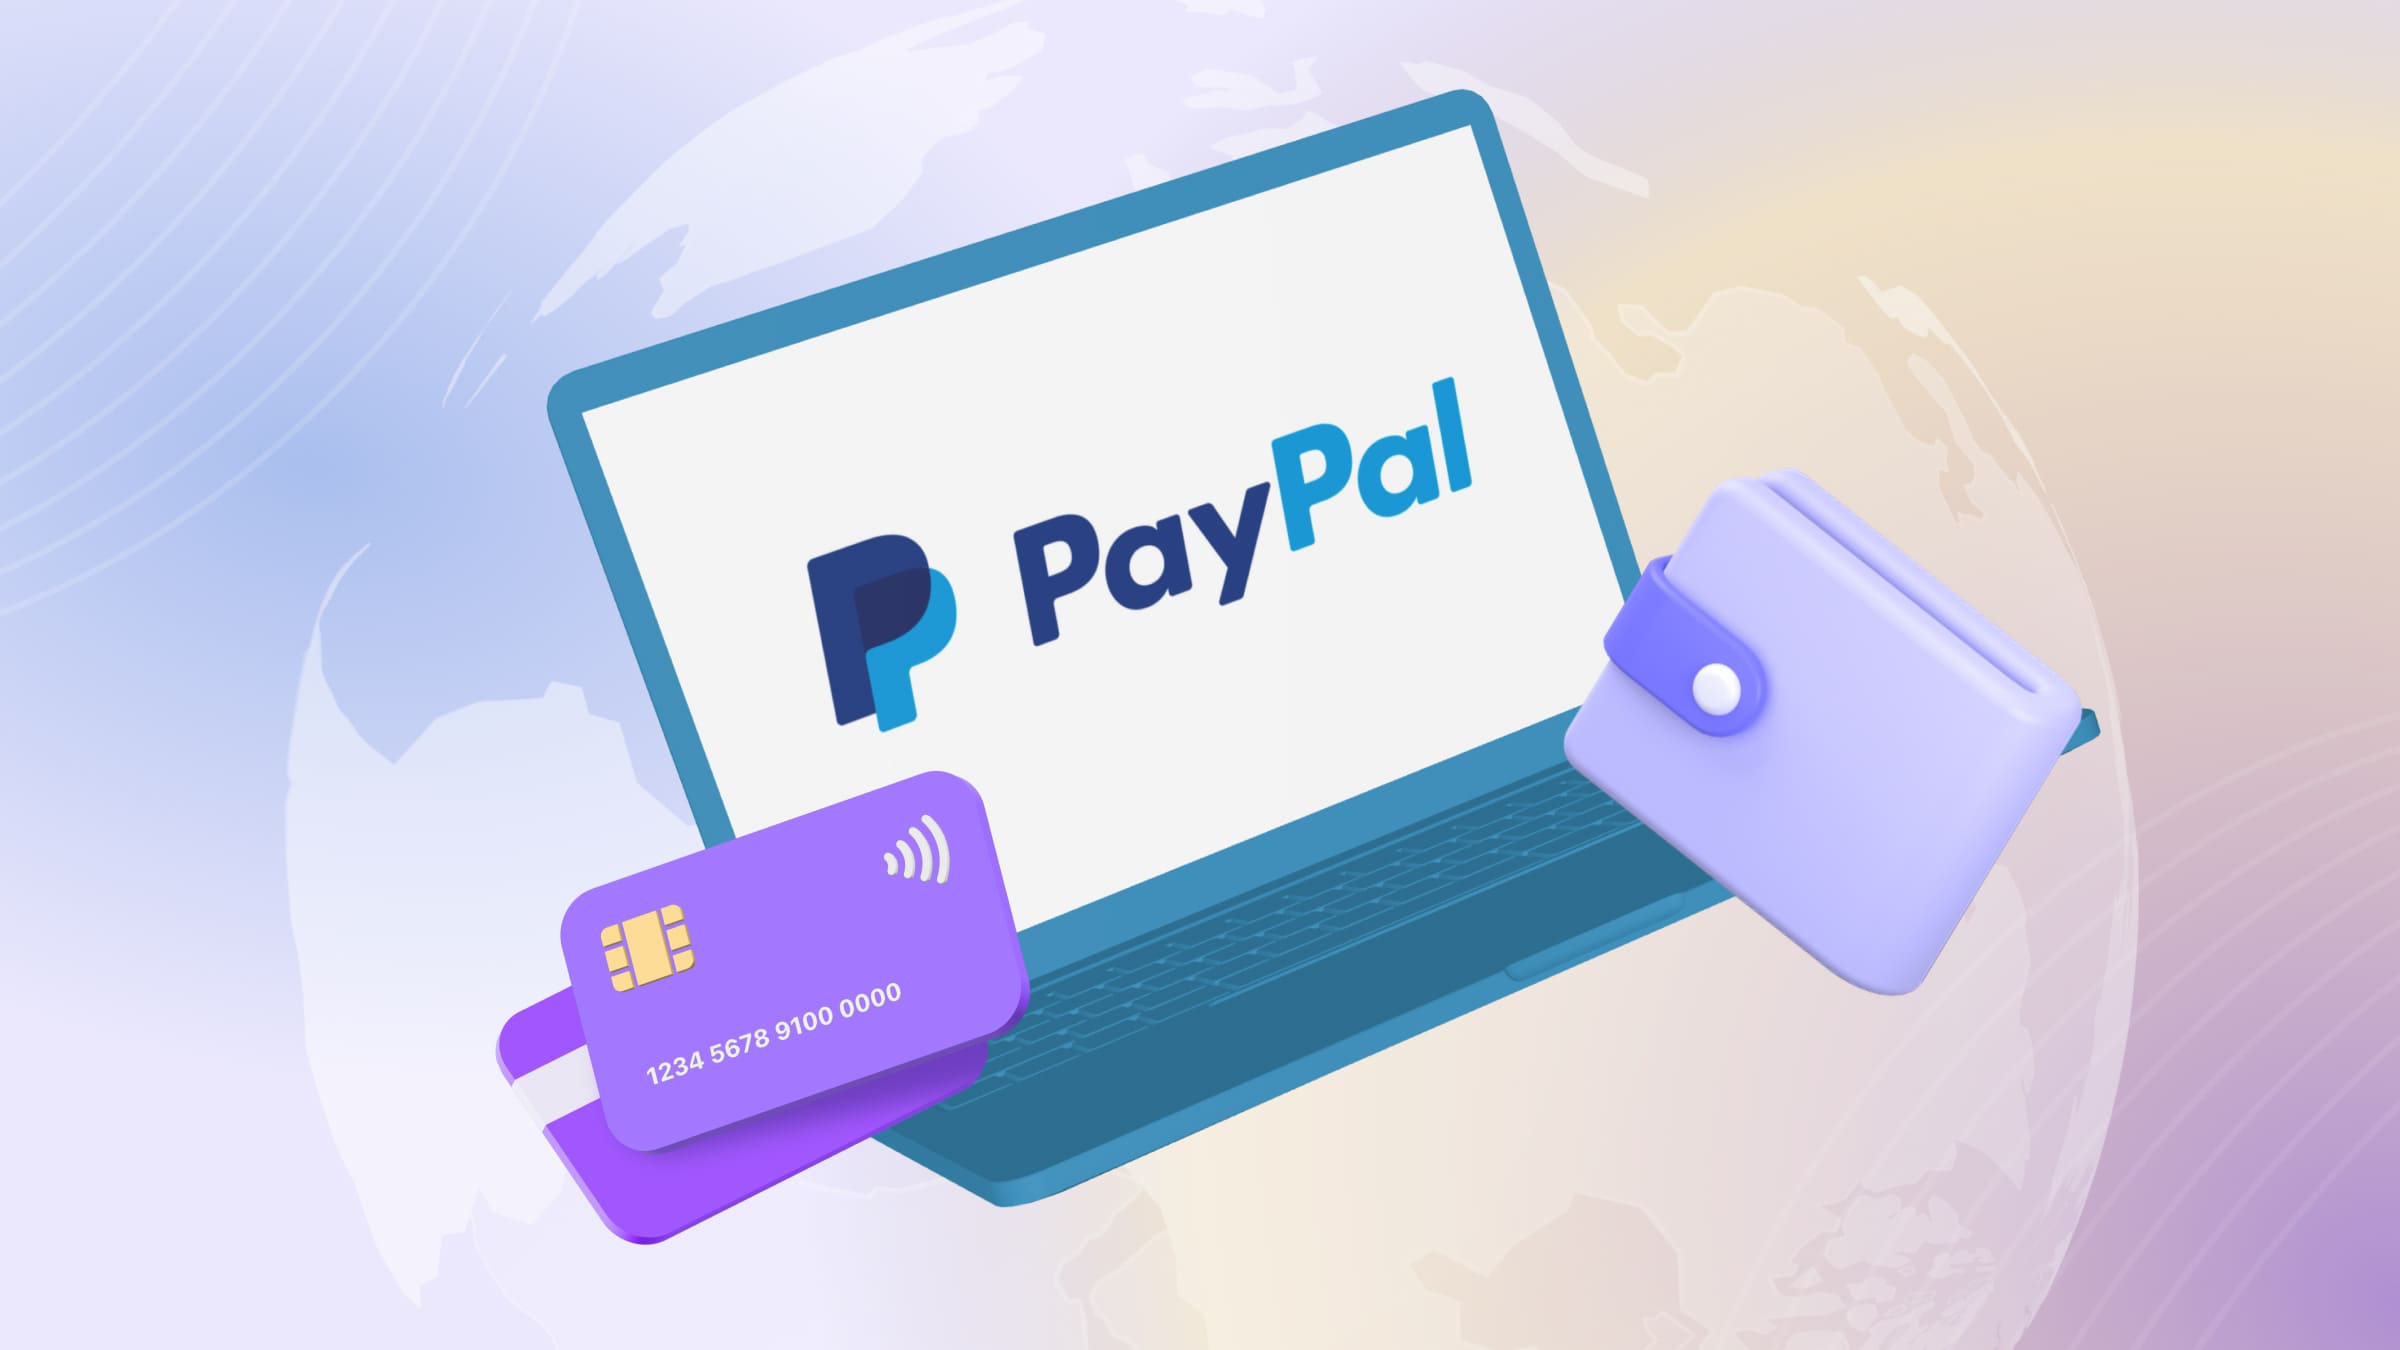 PayPal is an international payment system available in many countries.